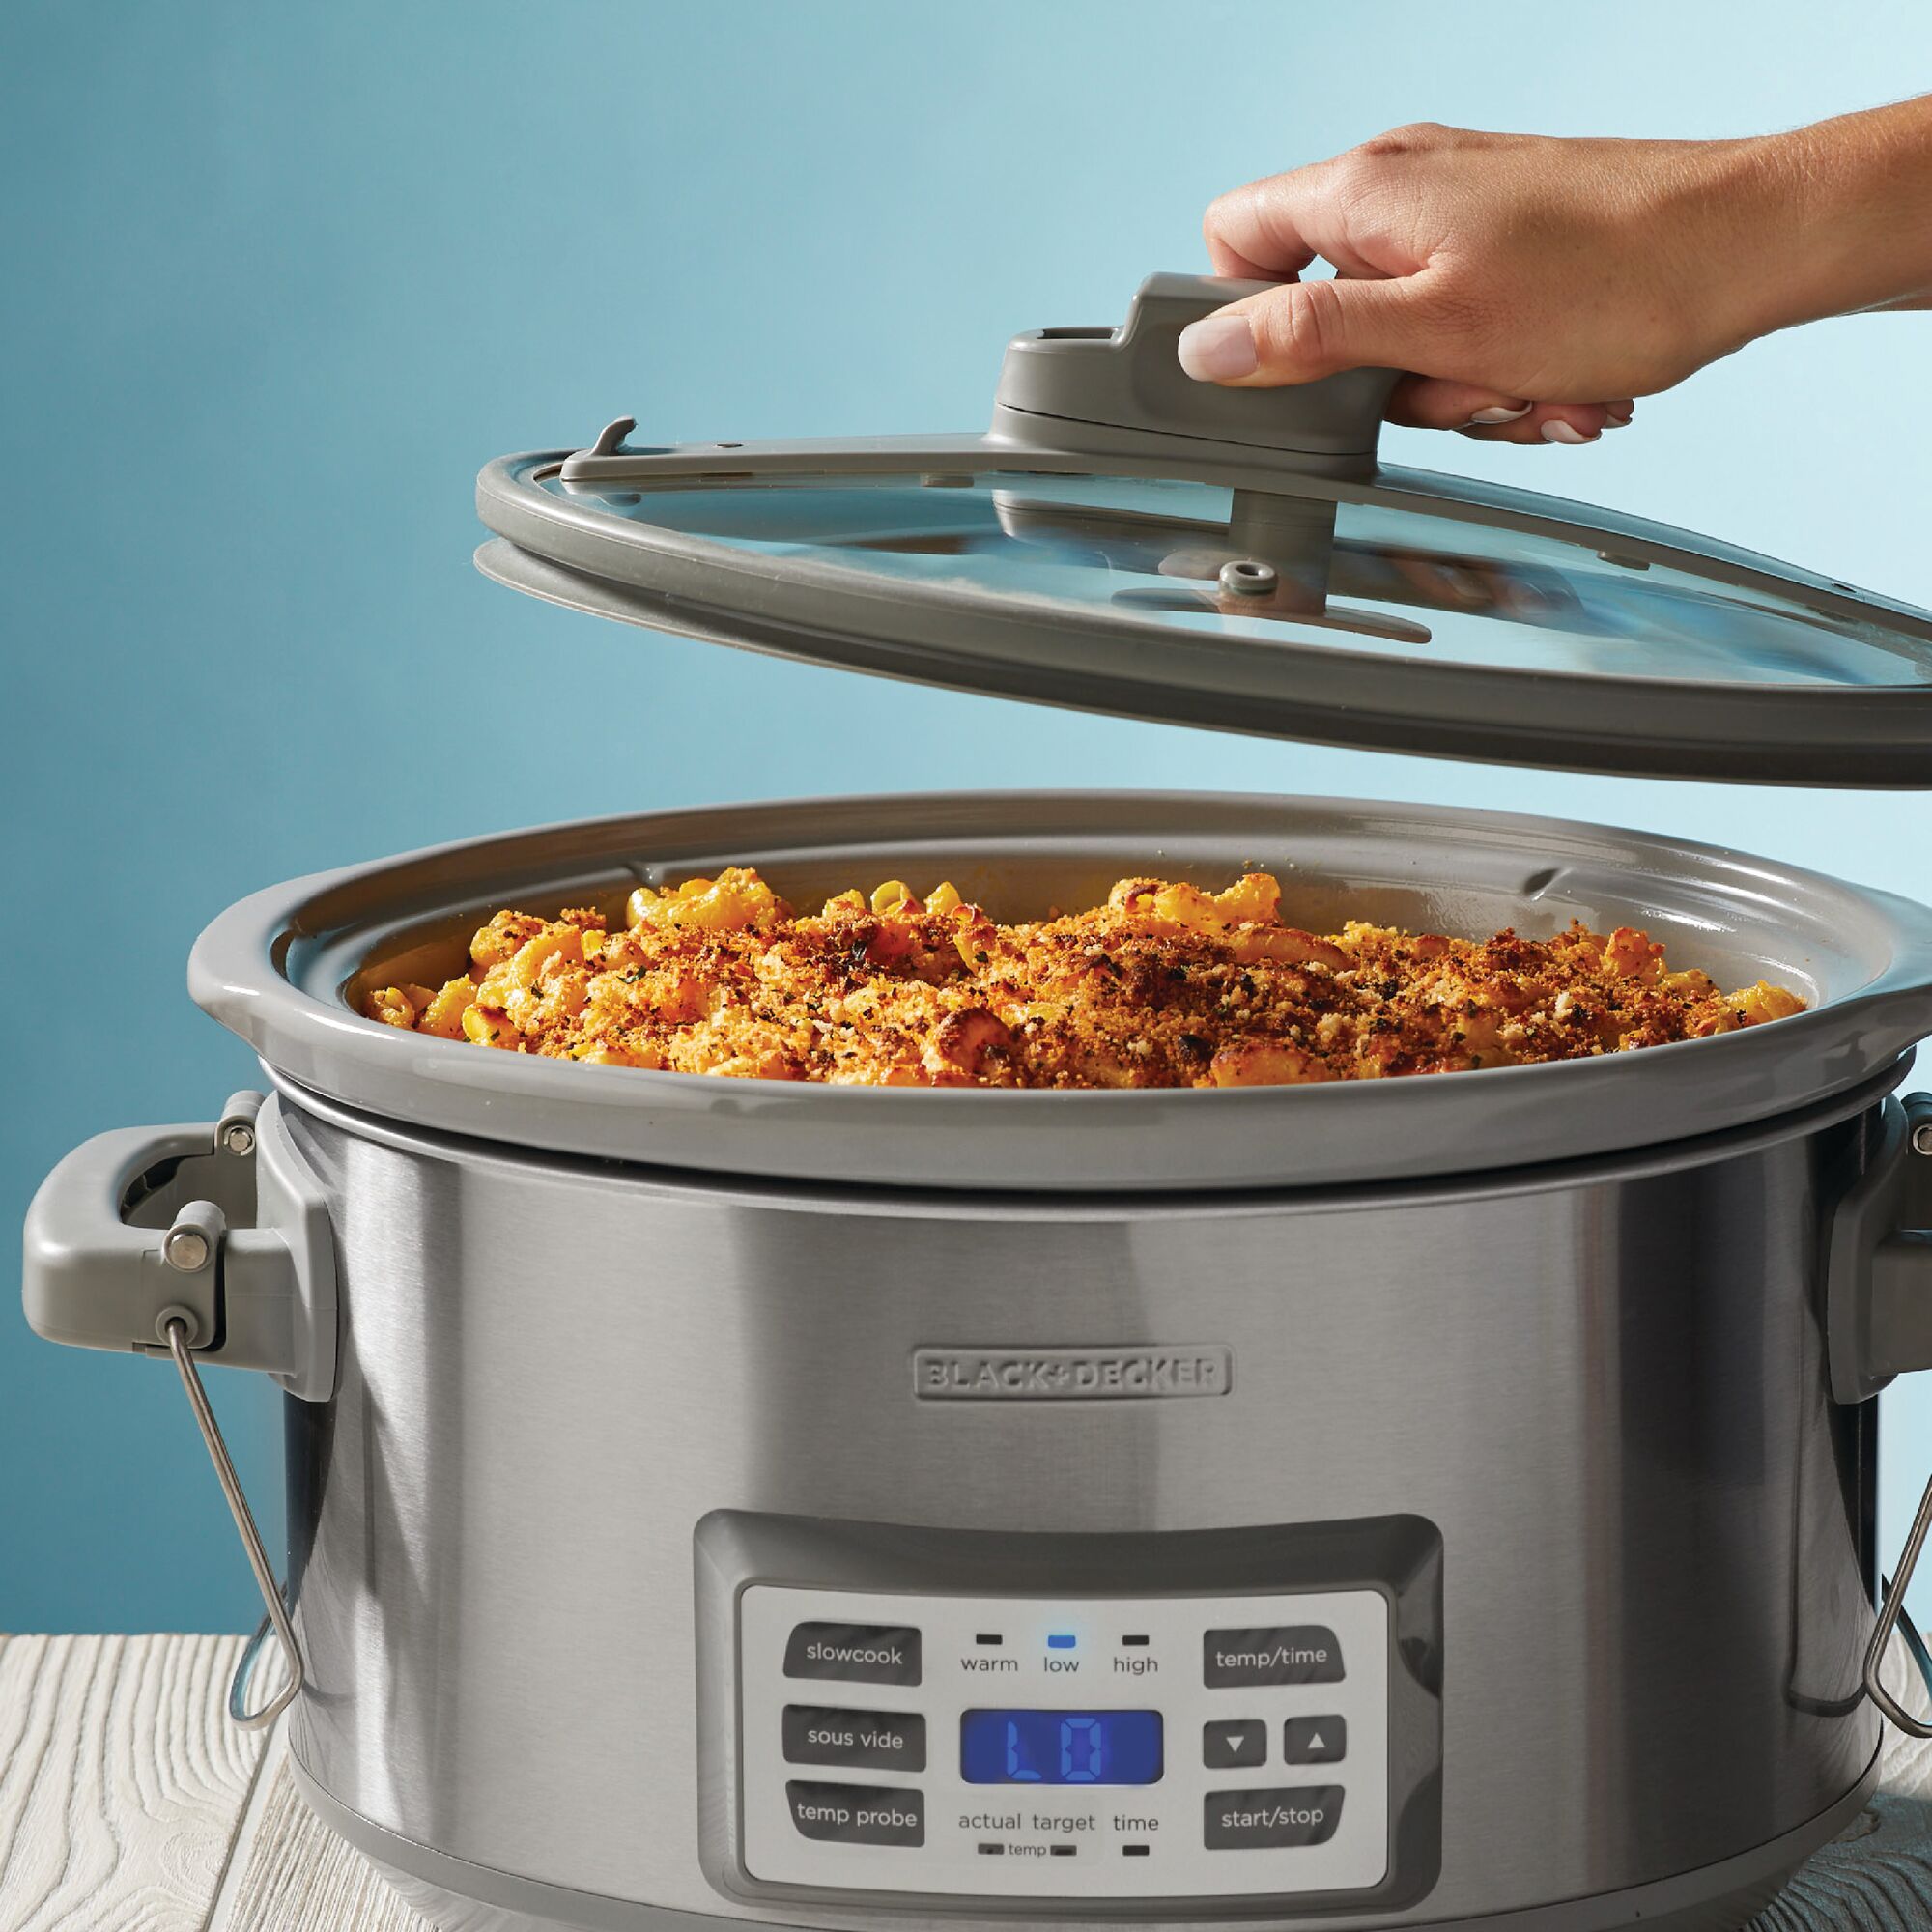 7 Quart Digital Slow Cooker with Temperature Probe + Precision Sous Vide being used to cook food.